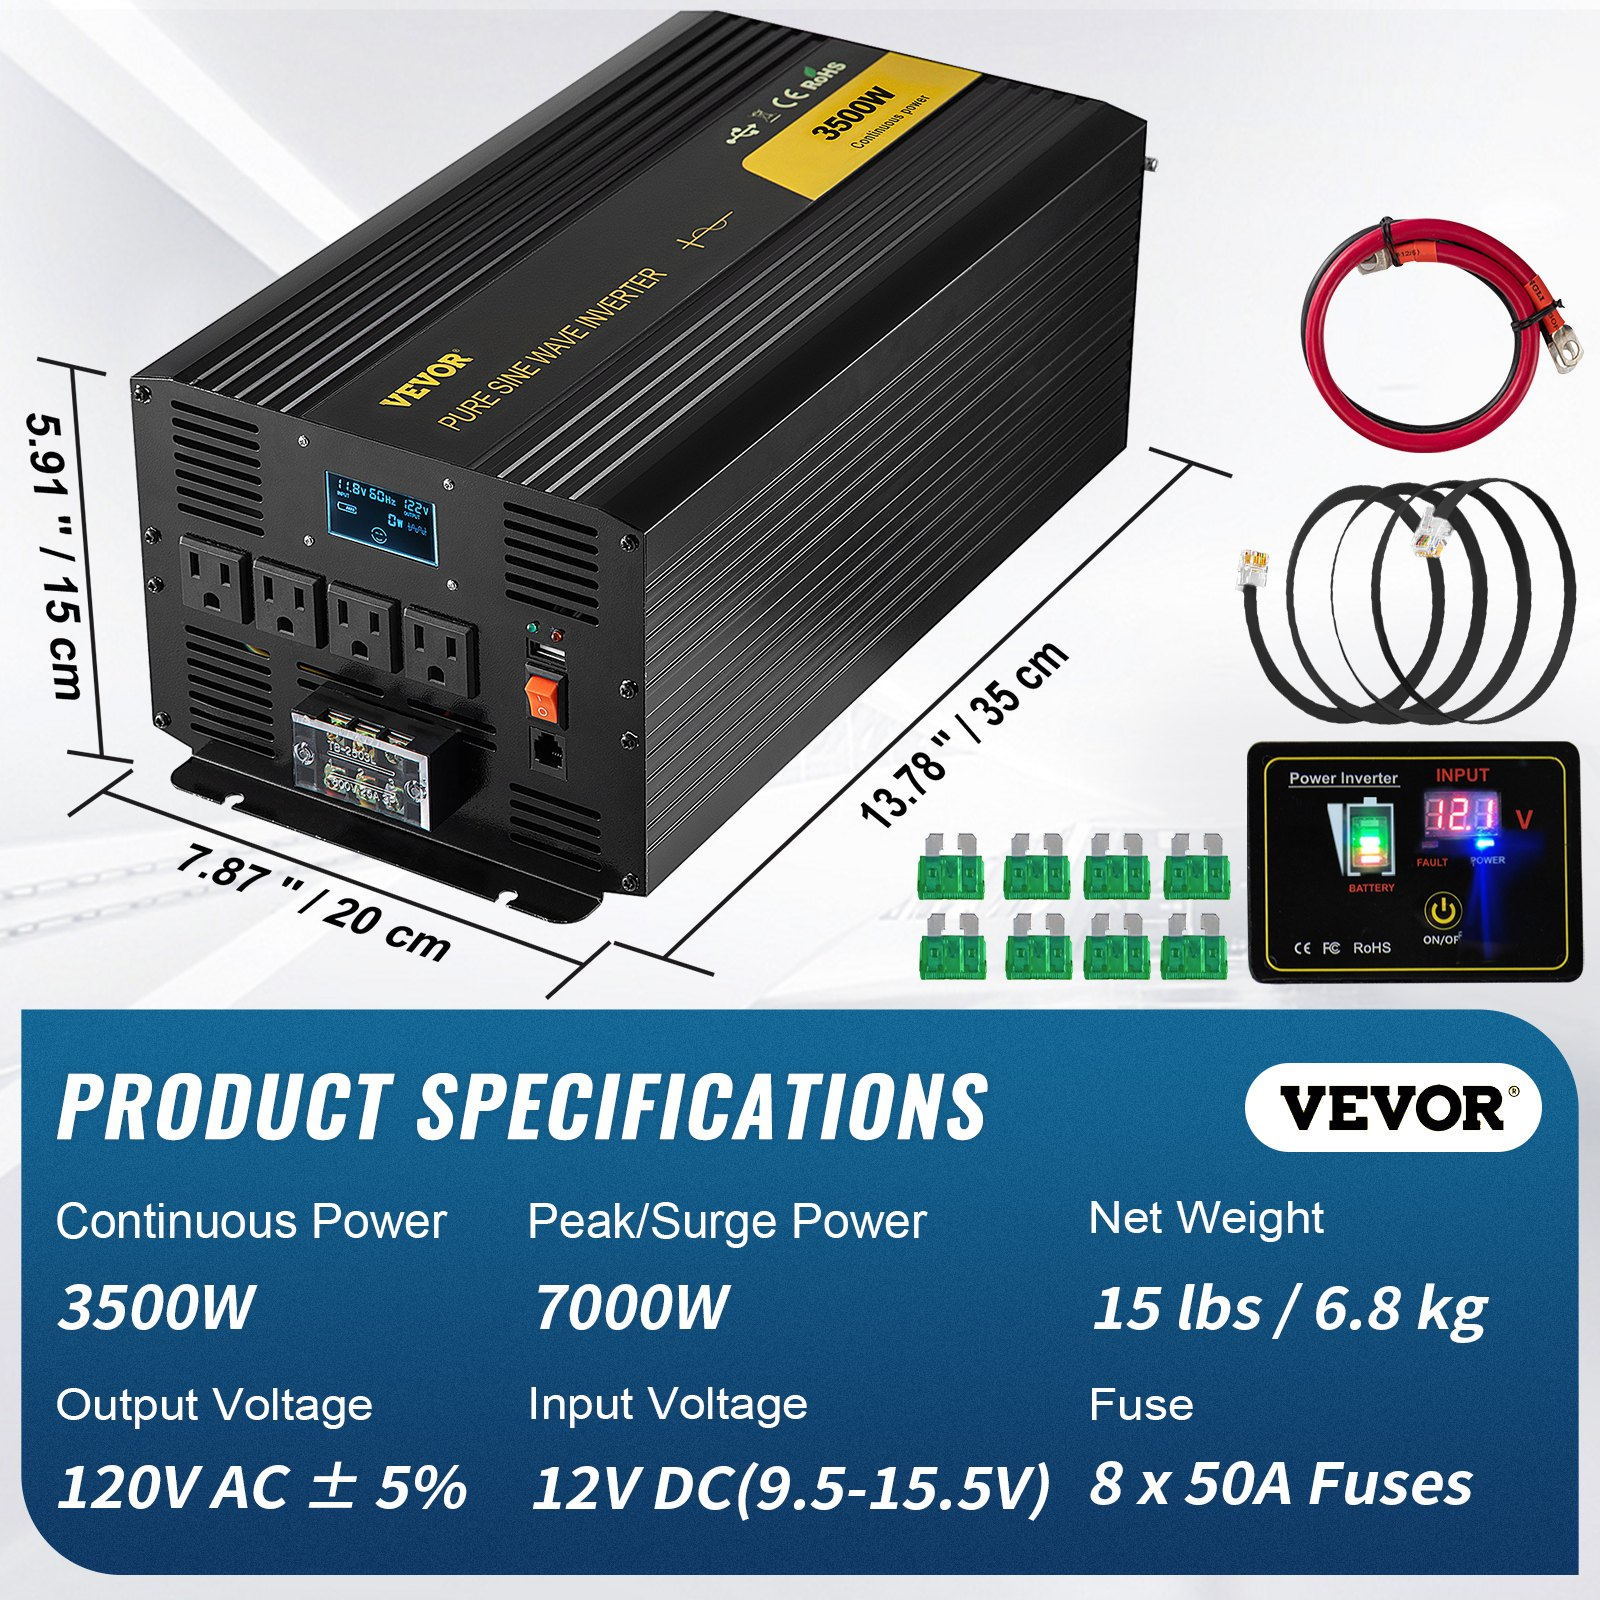 VEVOR Pure Sine Wave Inverter 3500 Watt Power Inverter, DC 12V to AC 120V Car Inverter, with USB Port LCD Display Remote Controller and AC Outlets (GFCI), for RV Truck Car Solar System Travel Camping, Goodies N Stuff